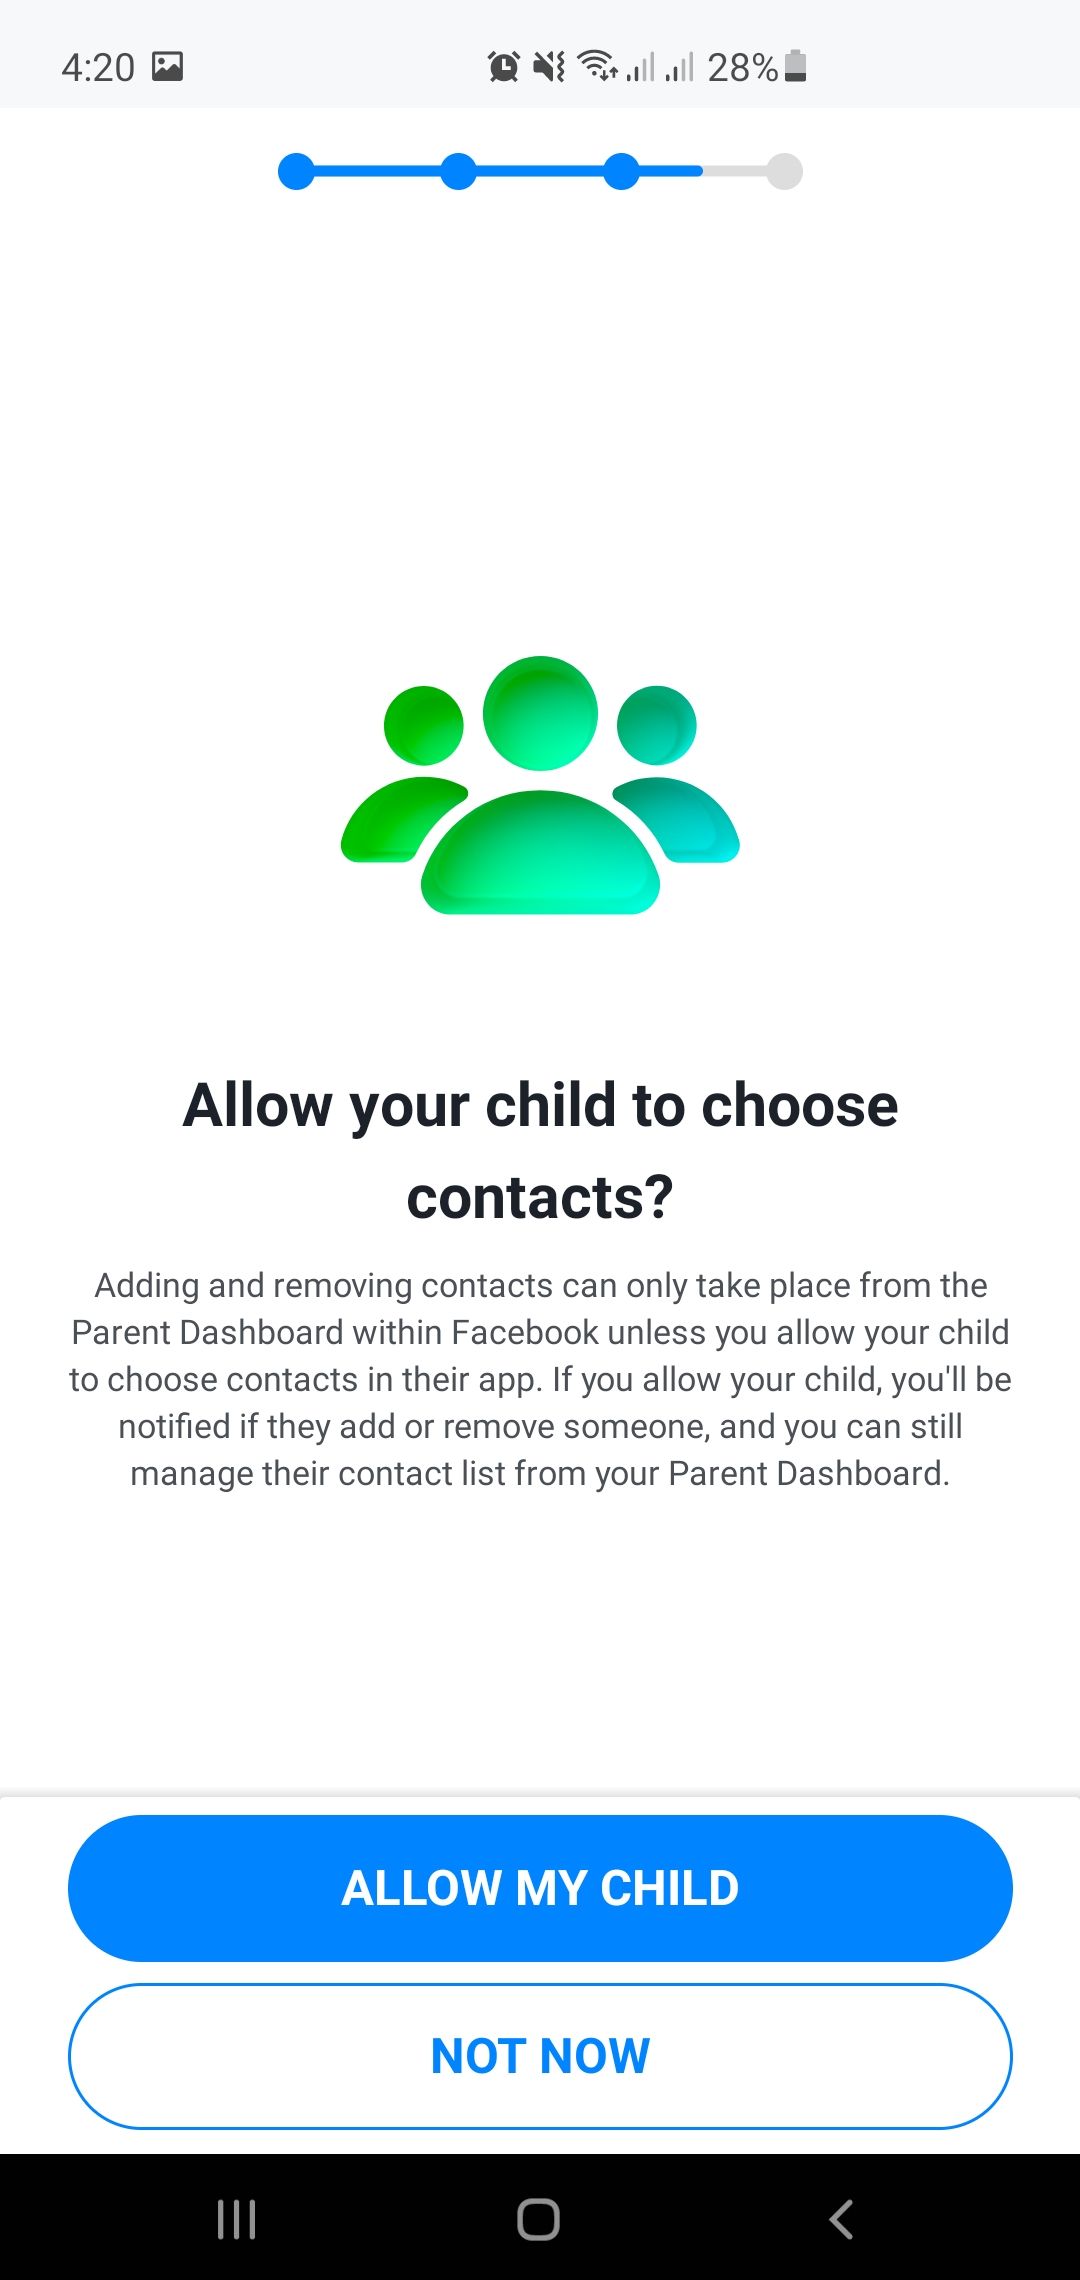 Allow your child to choose contacts